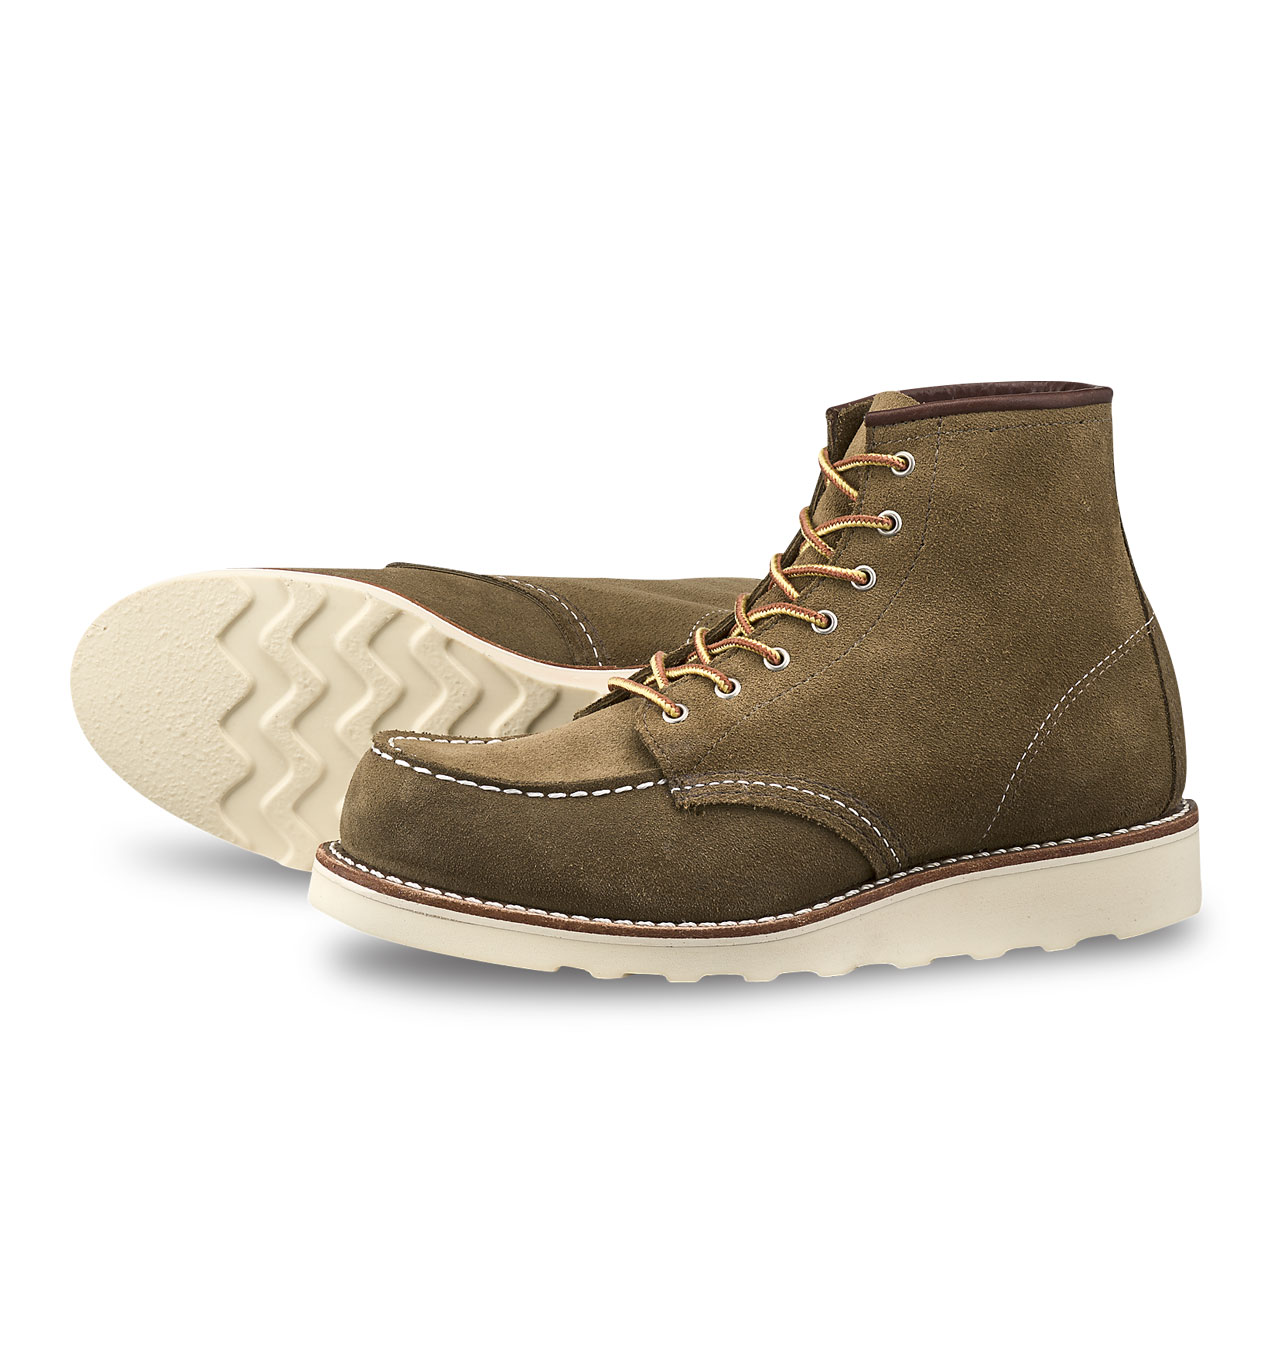 Red Wing Shoes Woman 3377 6-Inch Moc Toe - Olive Mohave